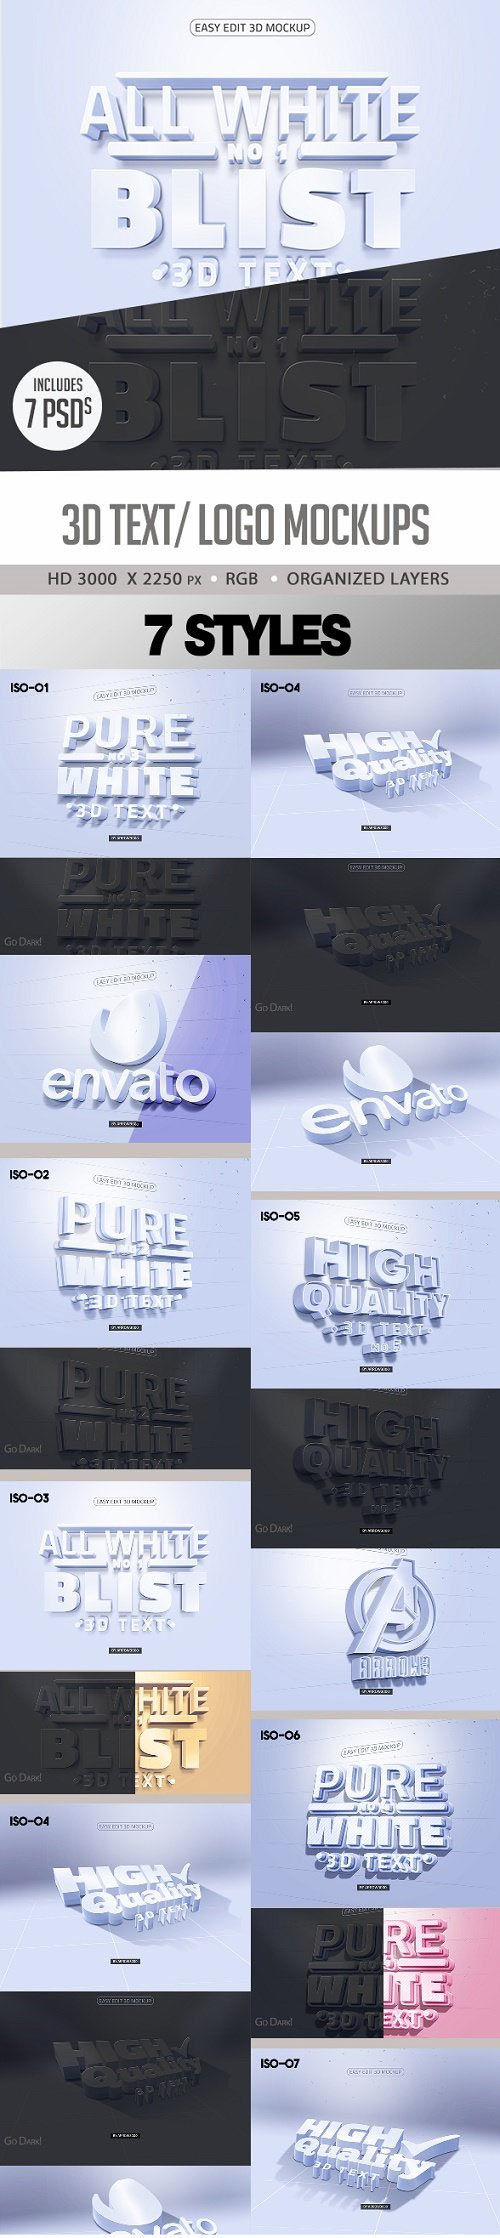 Pure White 3D Text / Logo Mock up